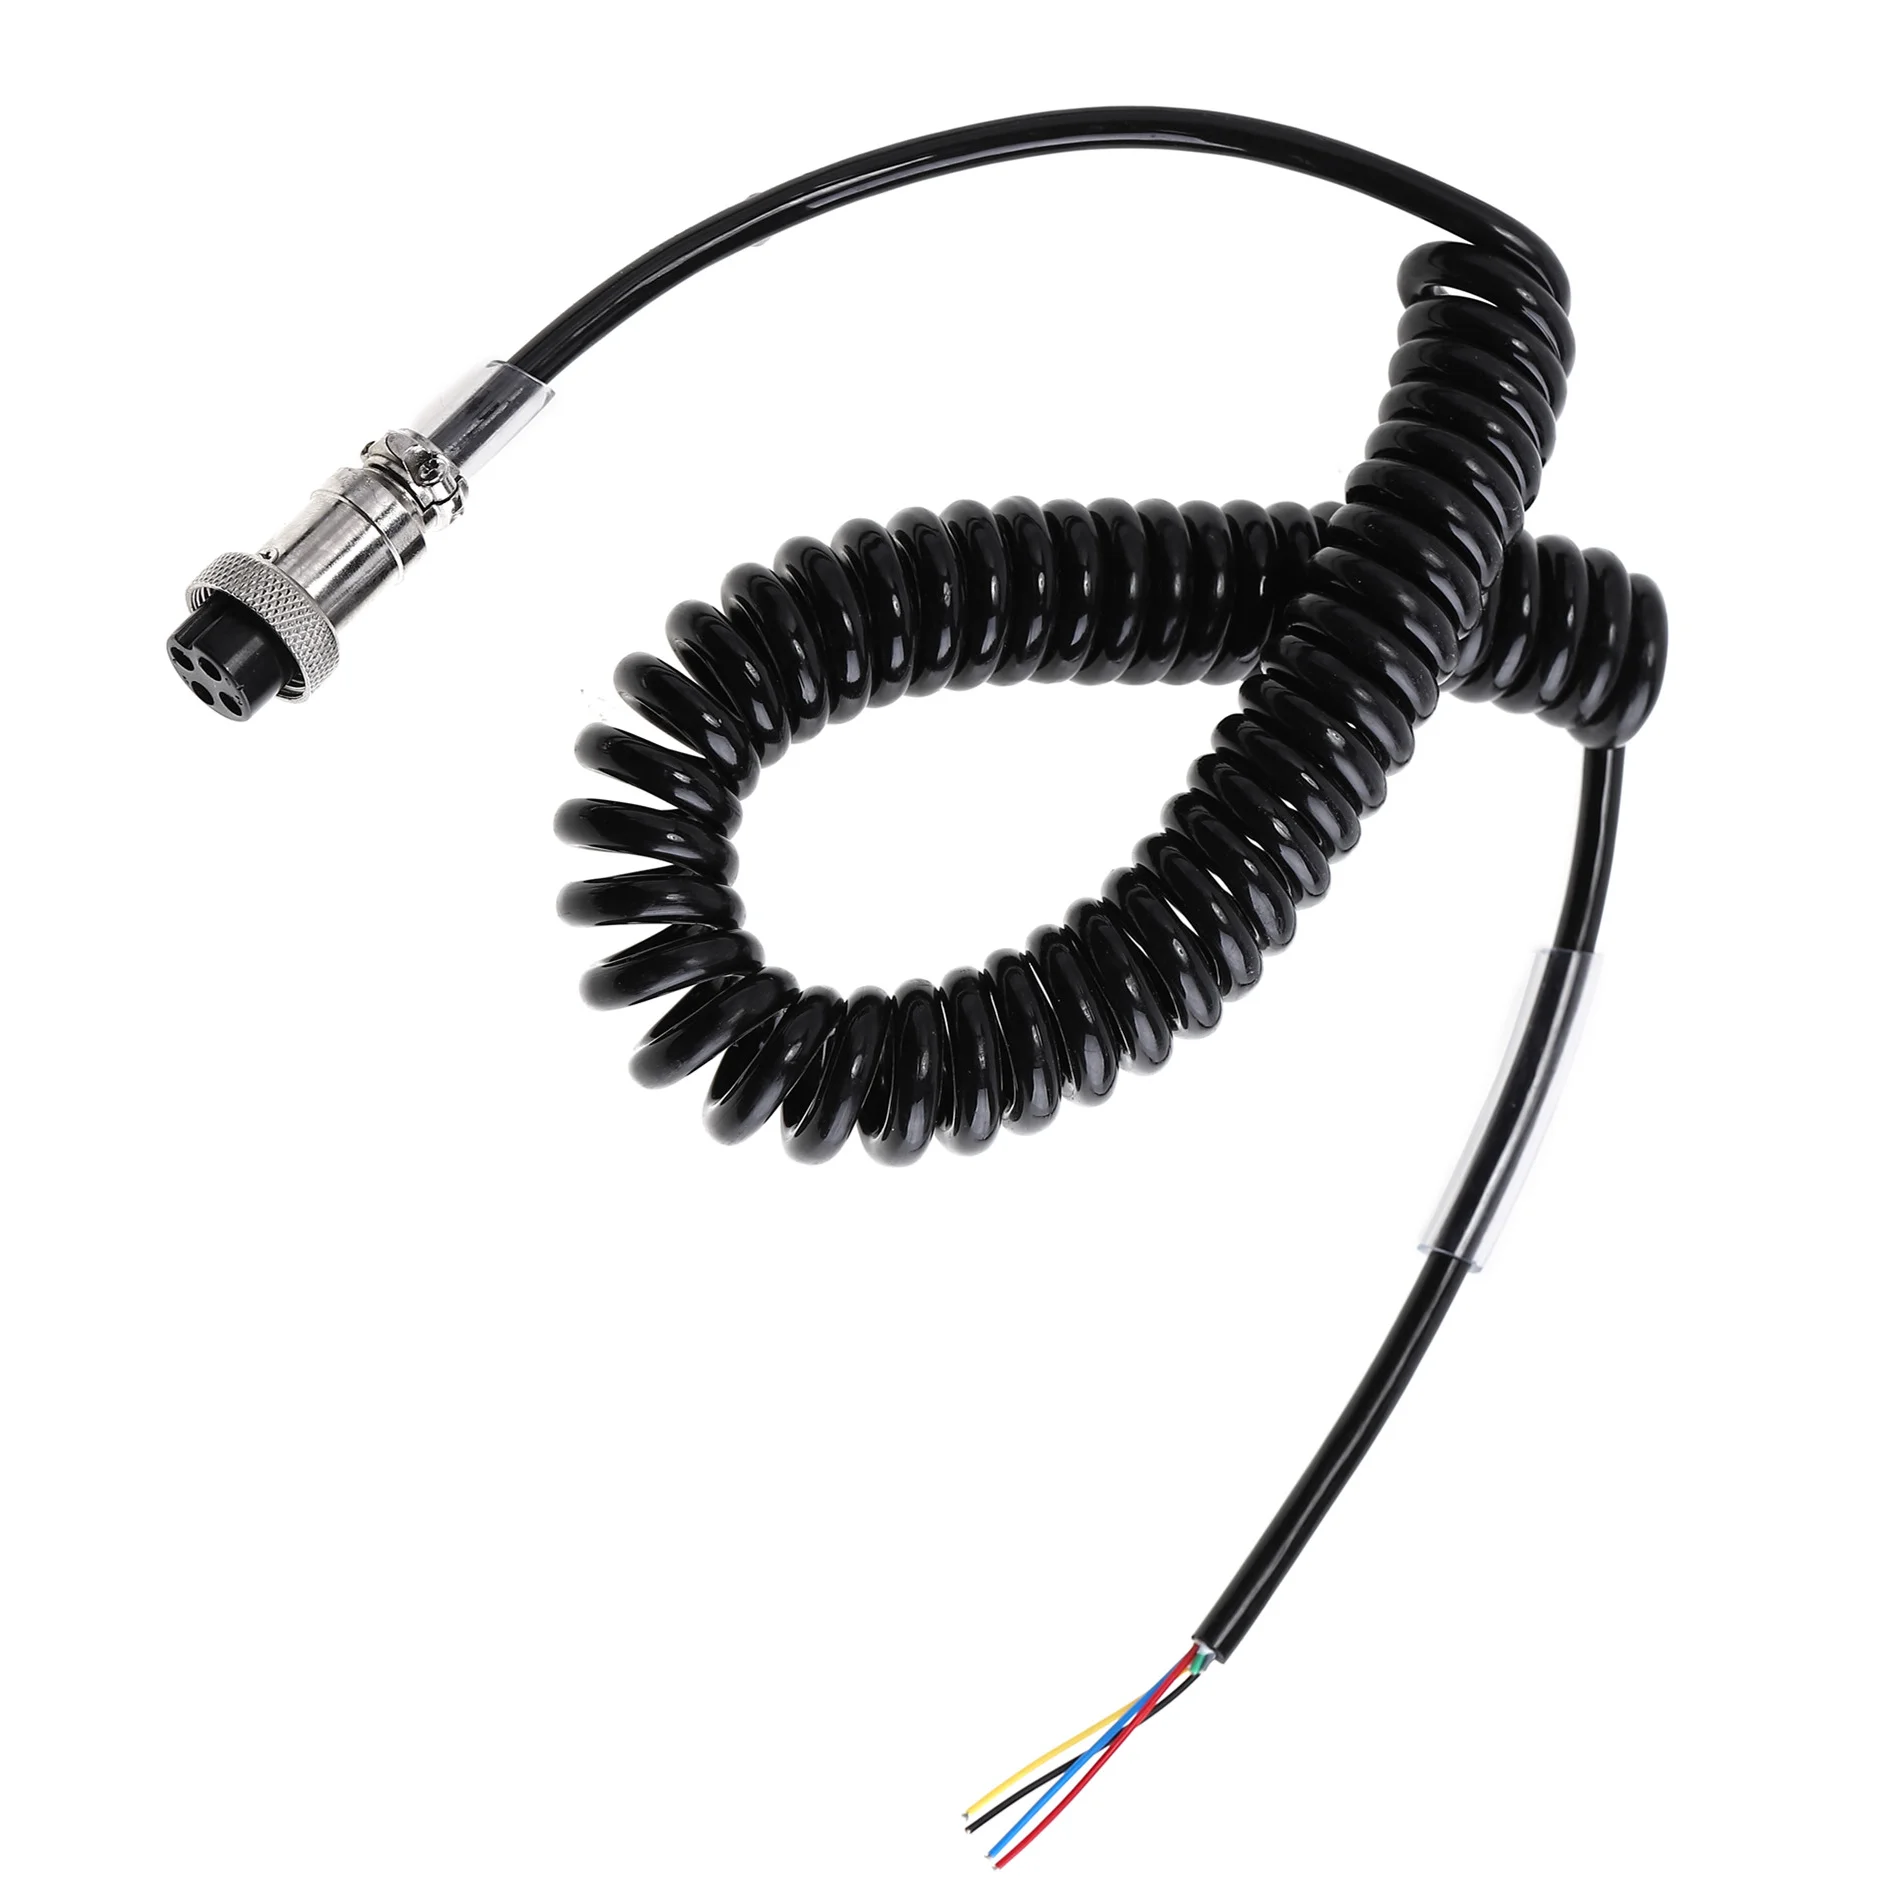 Replacement Mic Cable Cord Wire 4 Pin For Cobra Uniden Galaxy Car CB CB-12 CB-507 Microphone